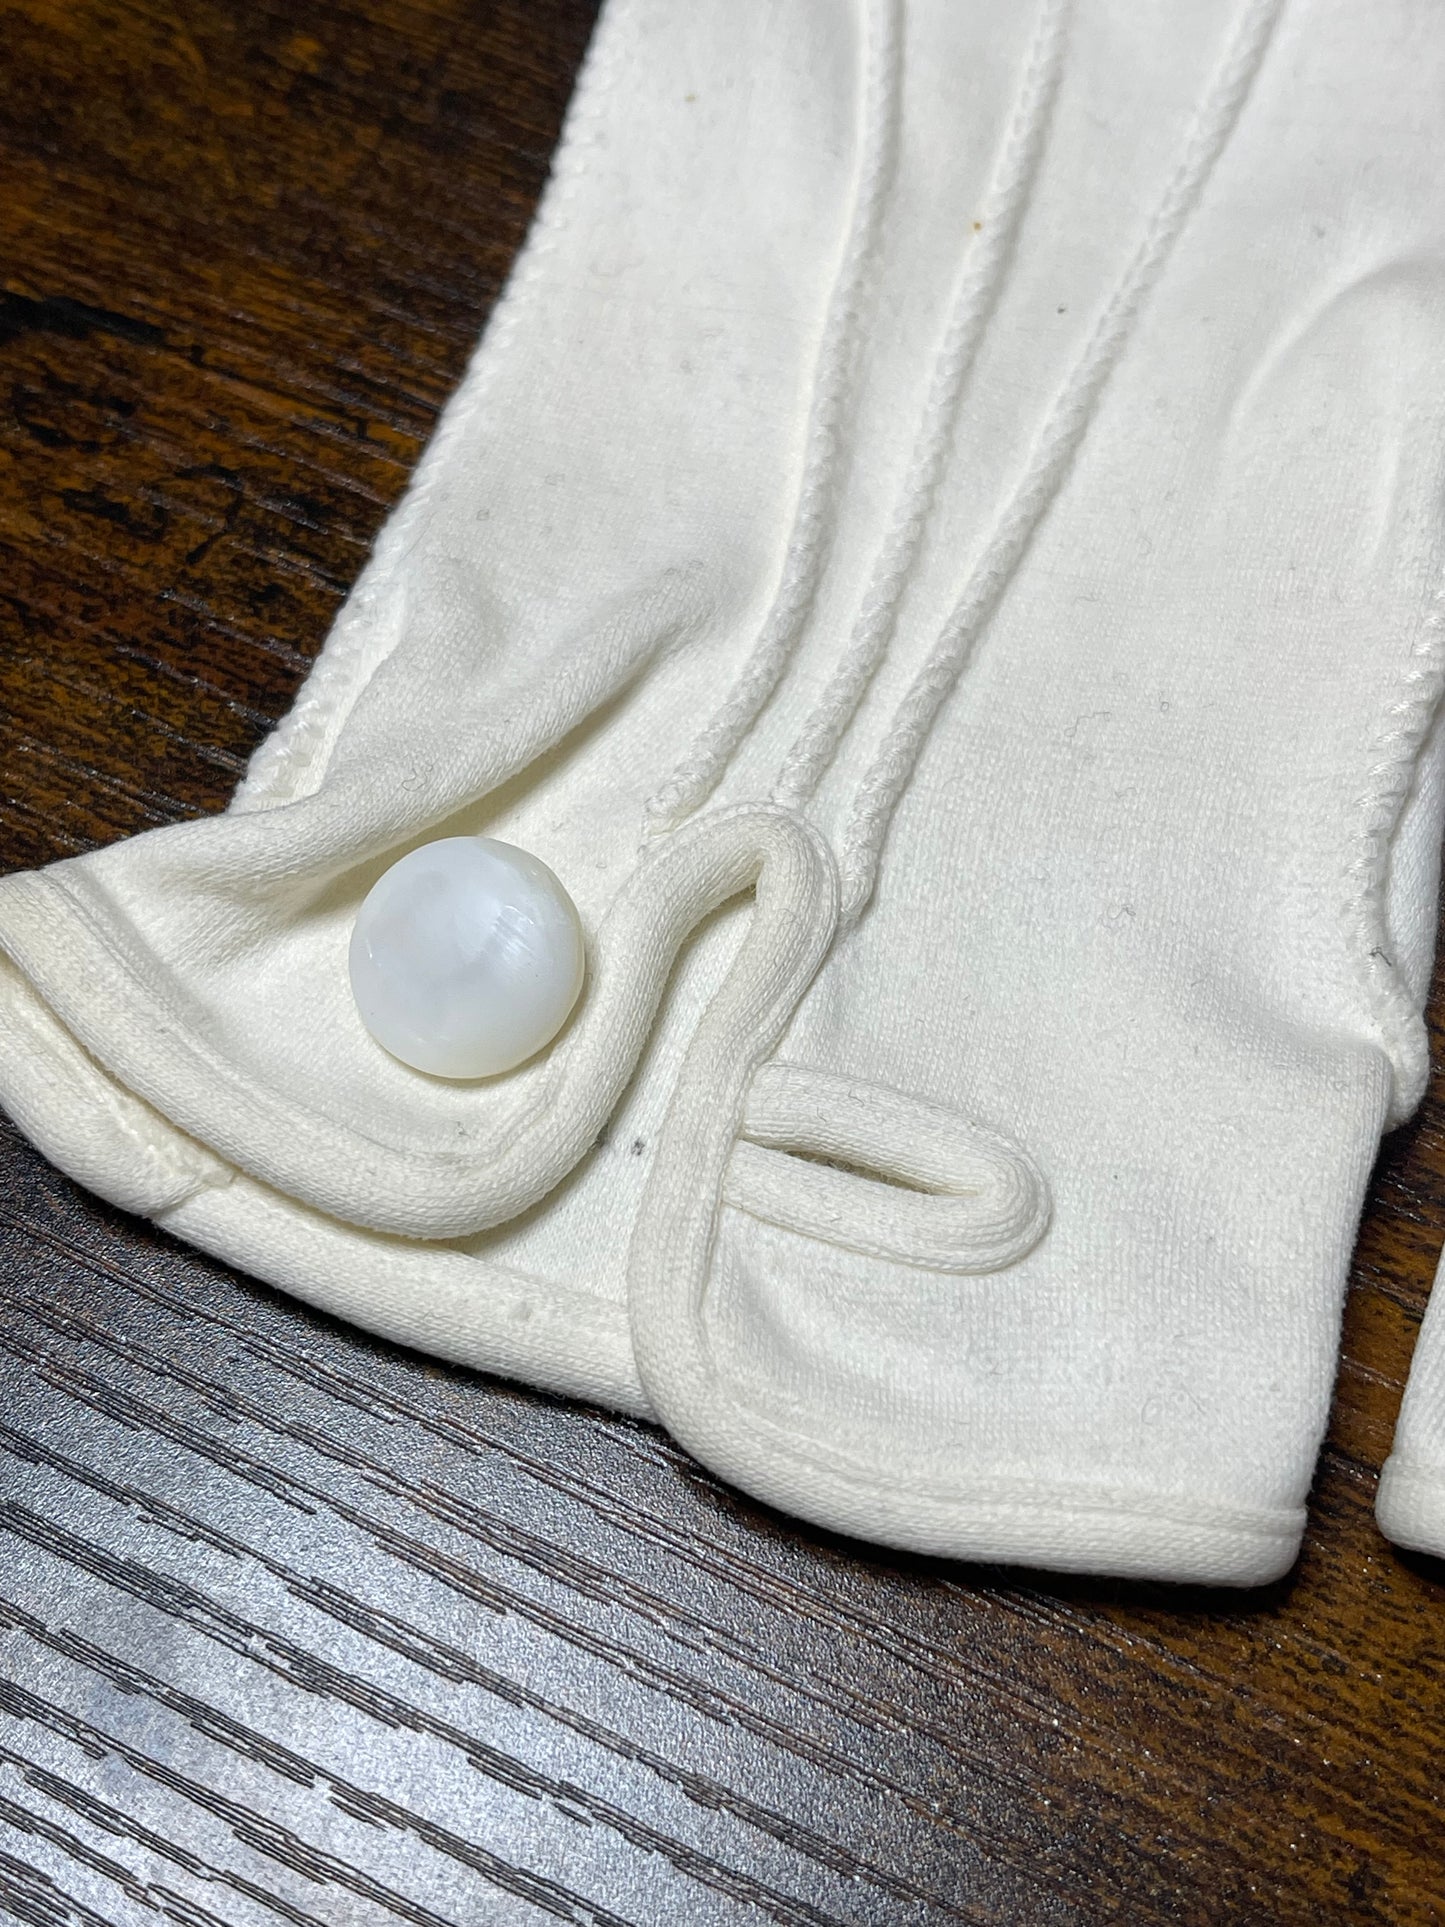 White Fabric Gloves with Button Closure